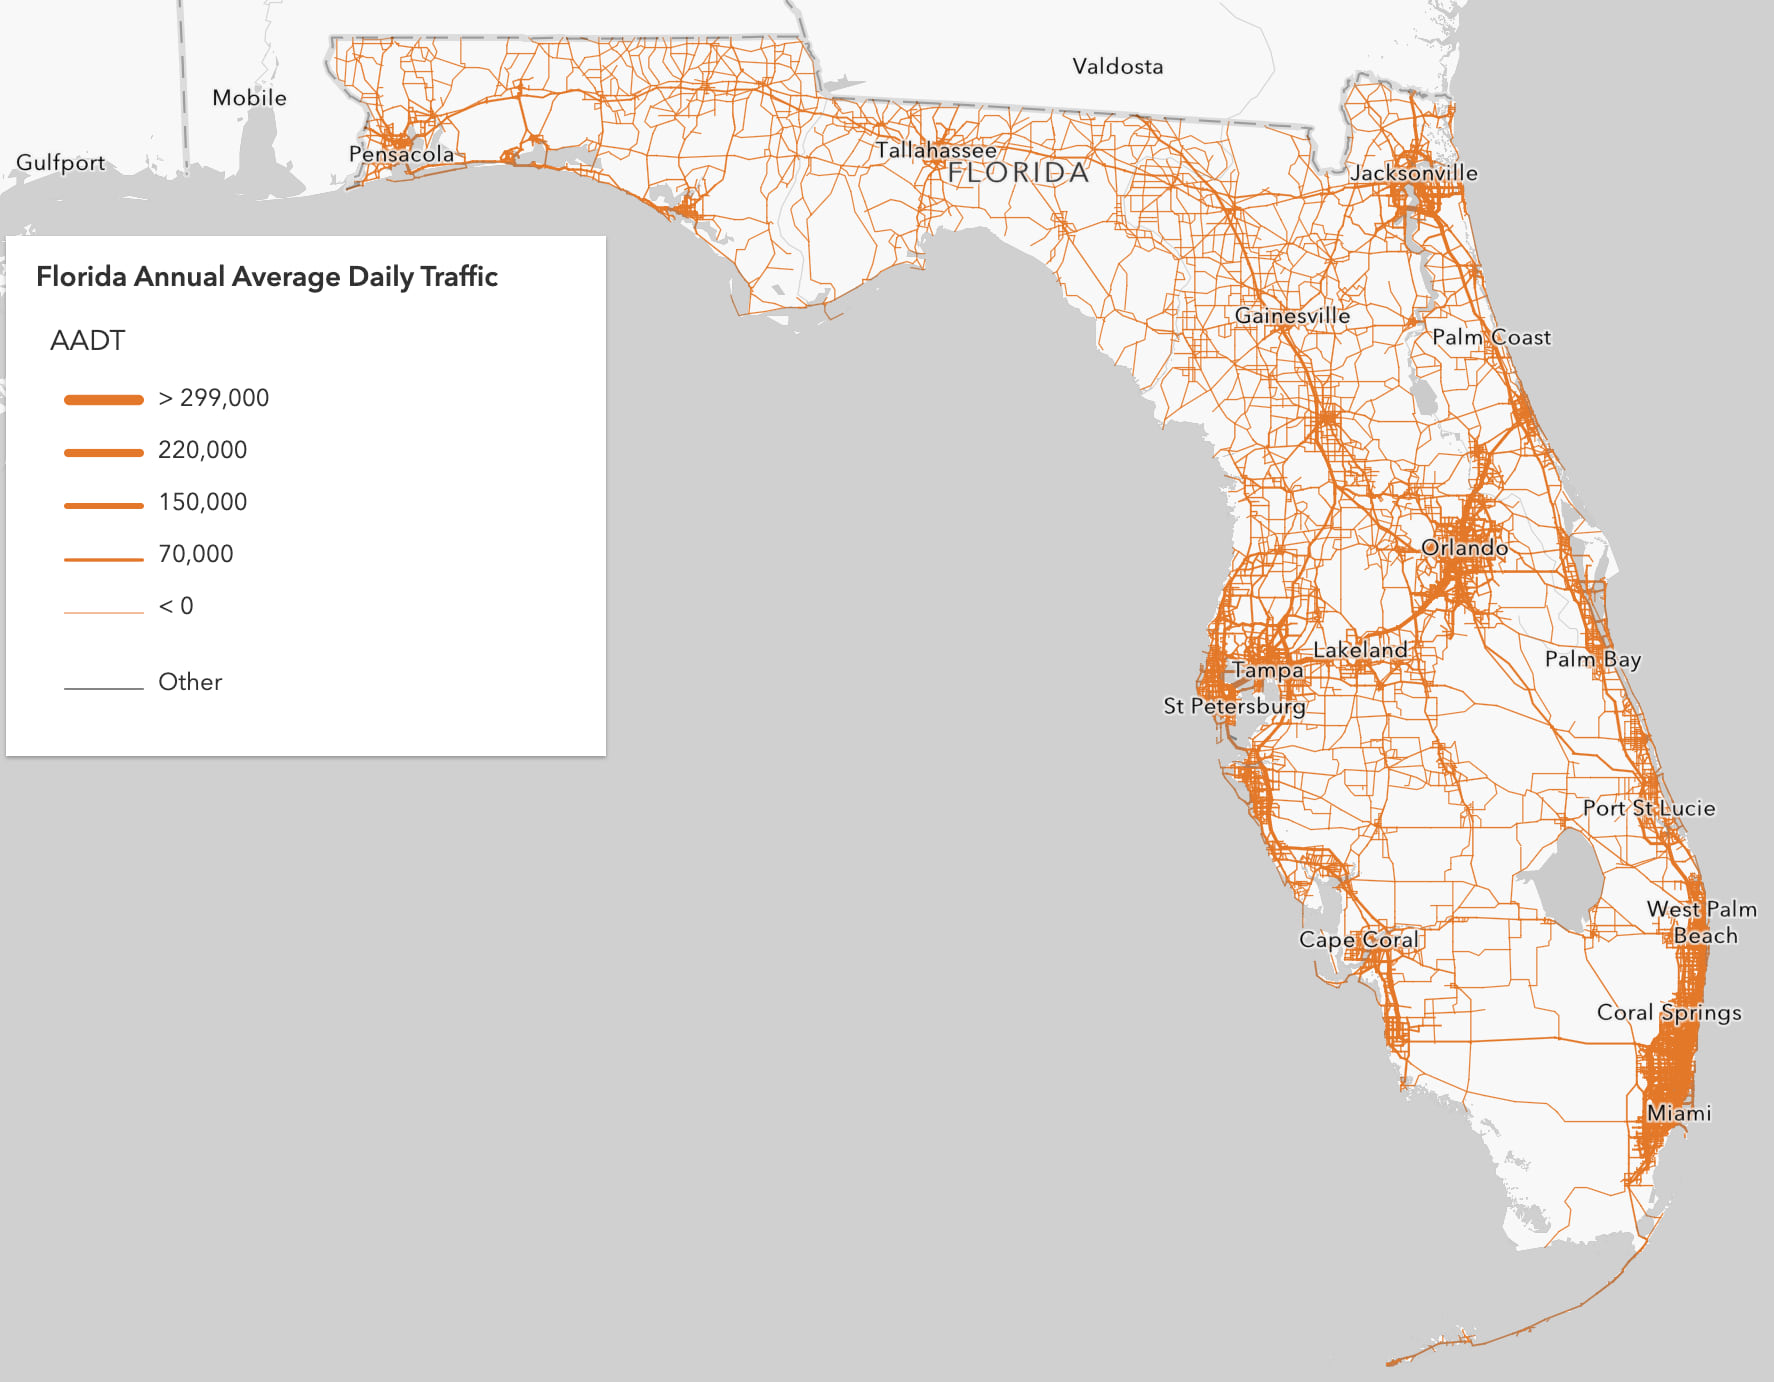 Annual average daily traffic on Florida highways. Thicker lines indicate heavier traffic. The thickness of each line shrinks as you zoom out.